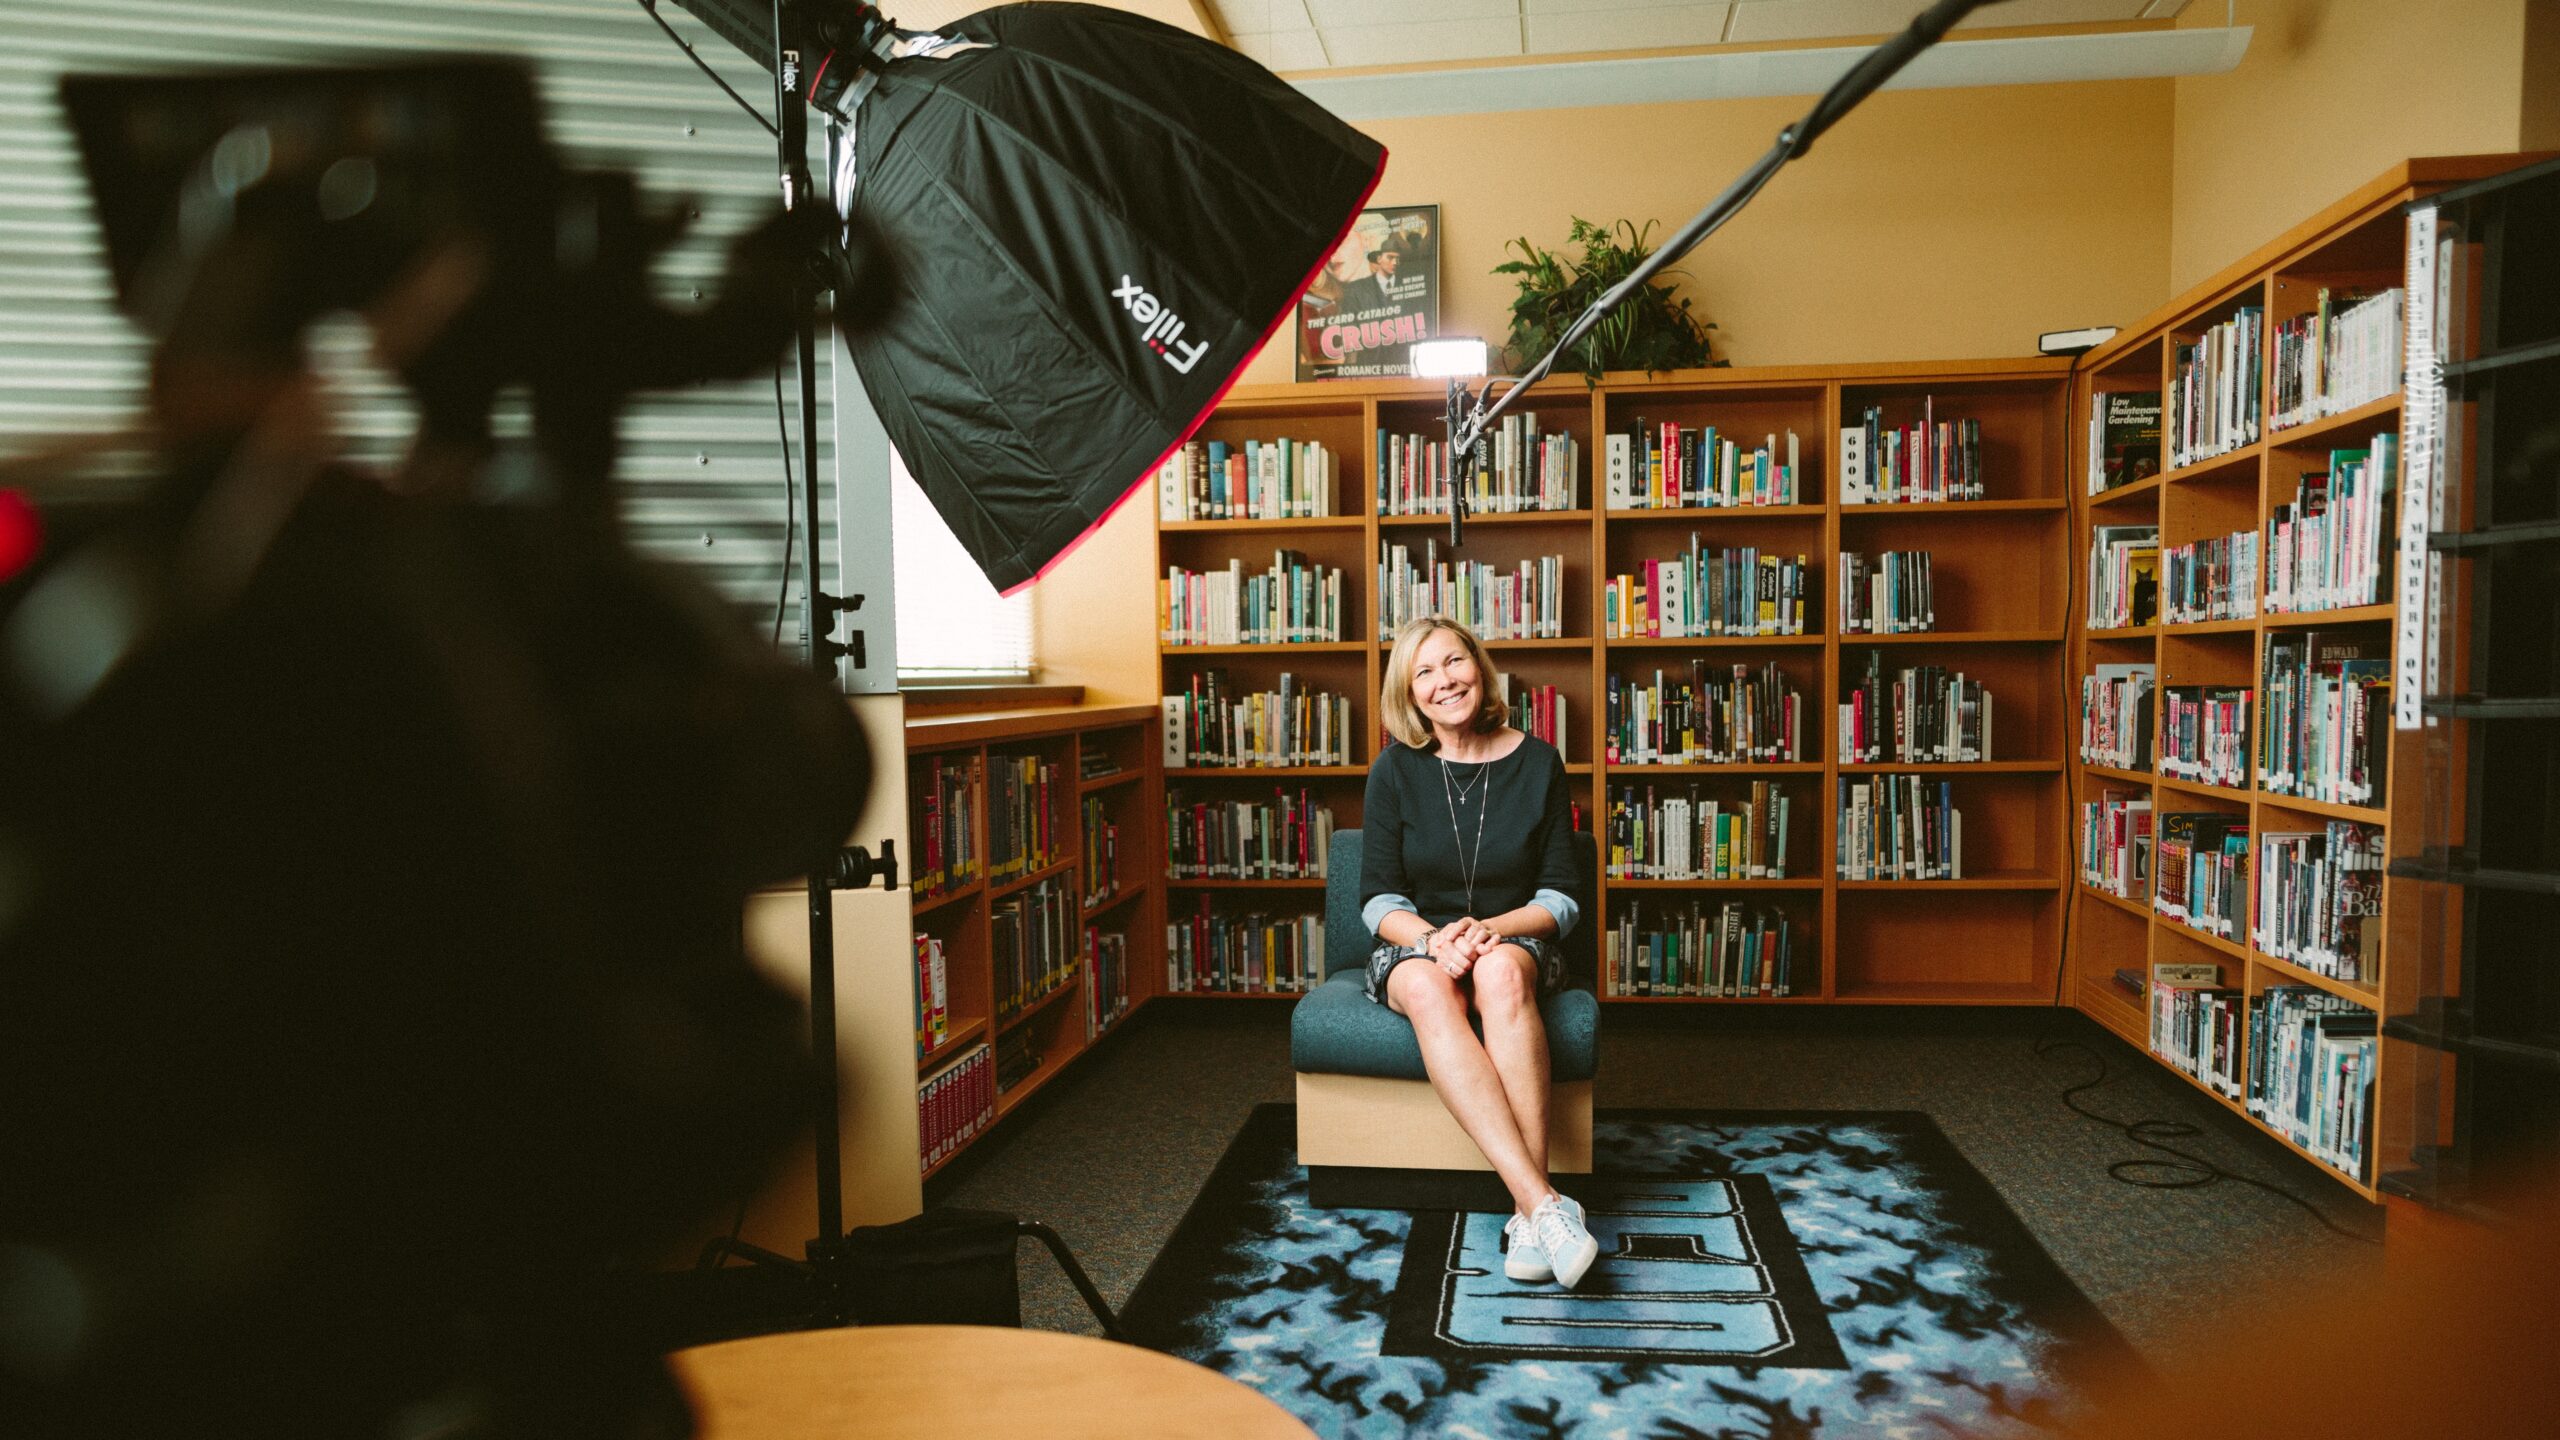 A lady is happily sitting in a library being interviewed during a half-day shoot by Concept Films.